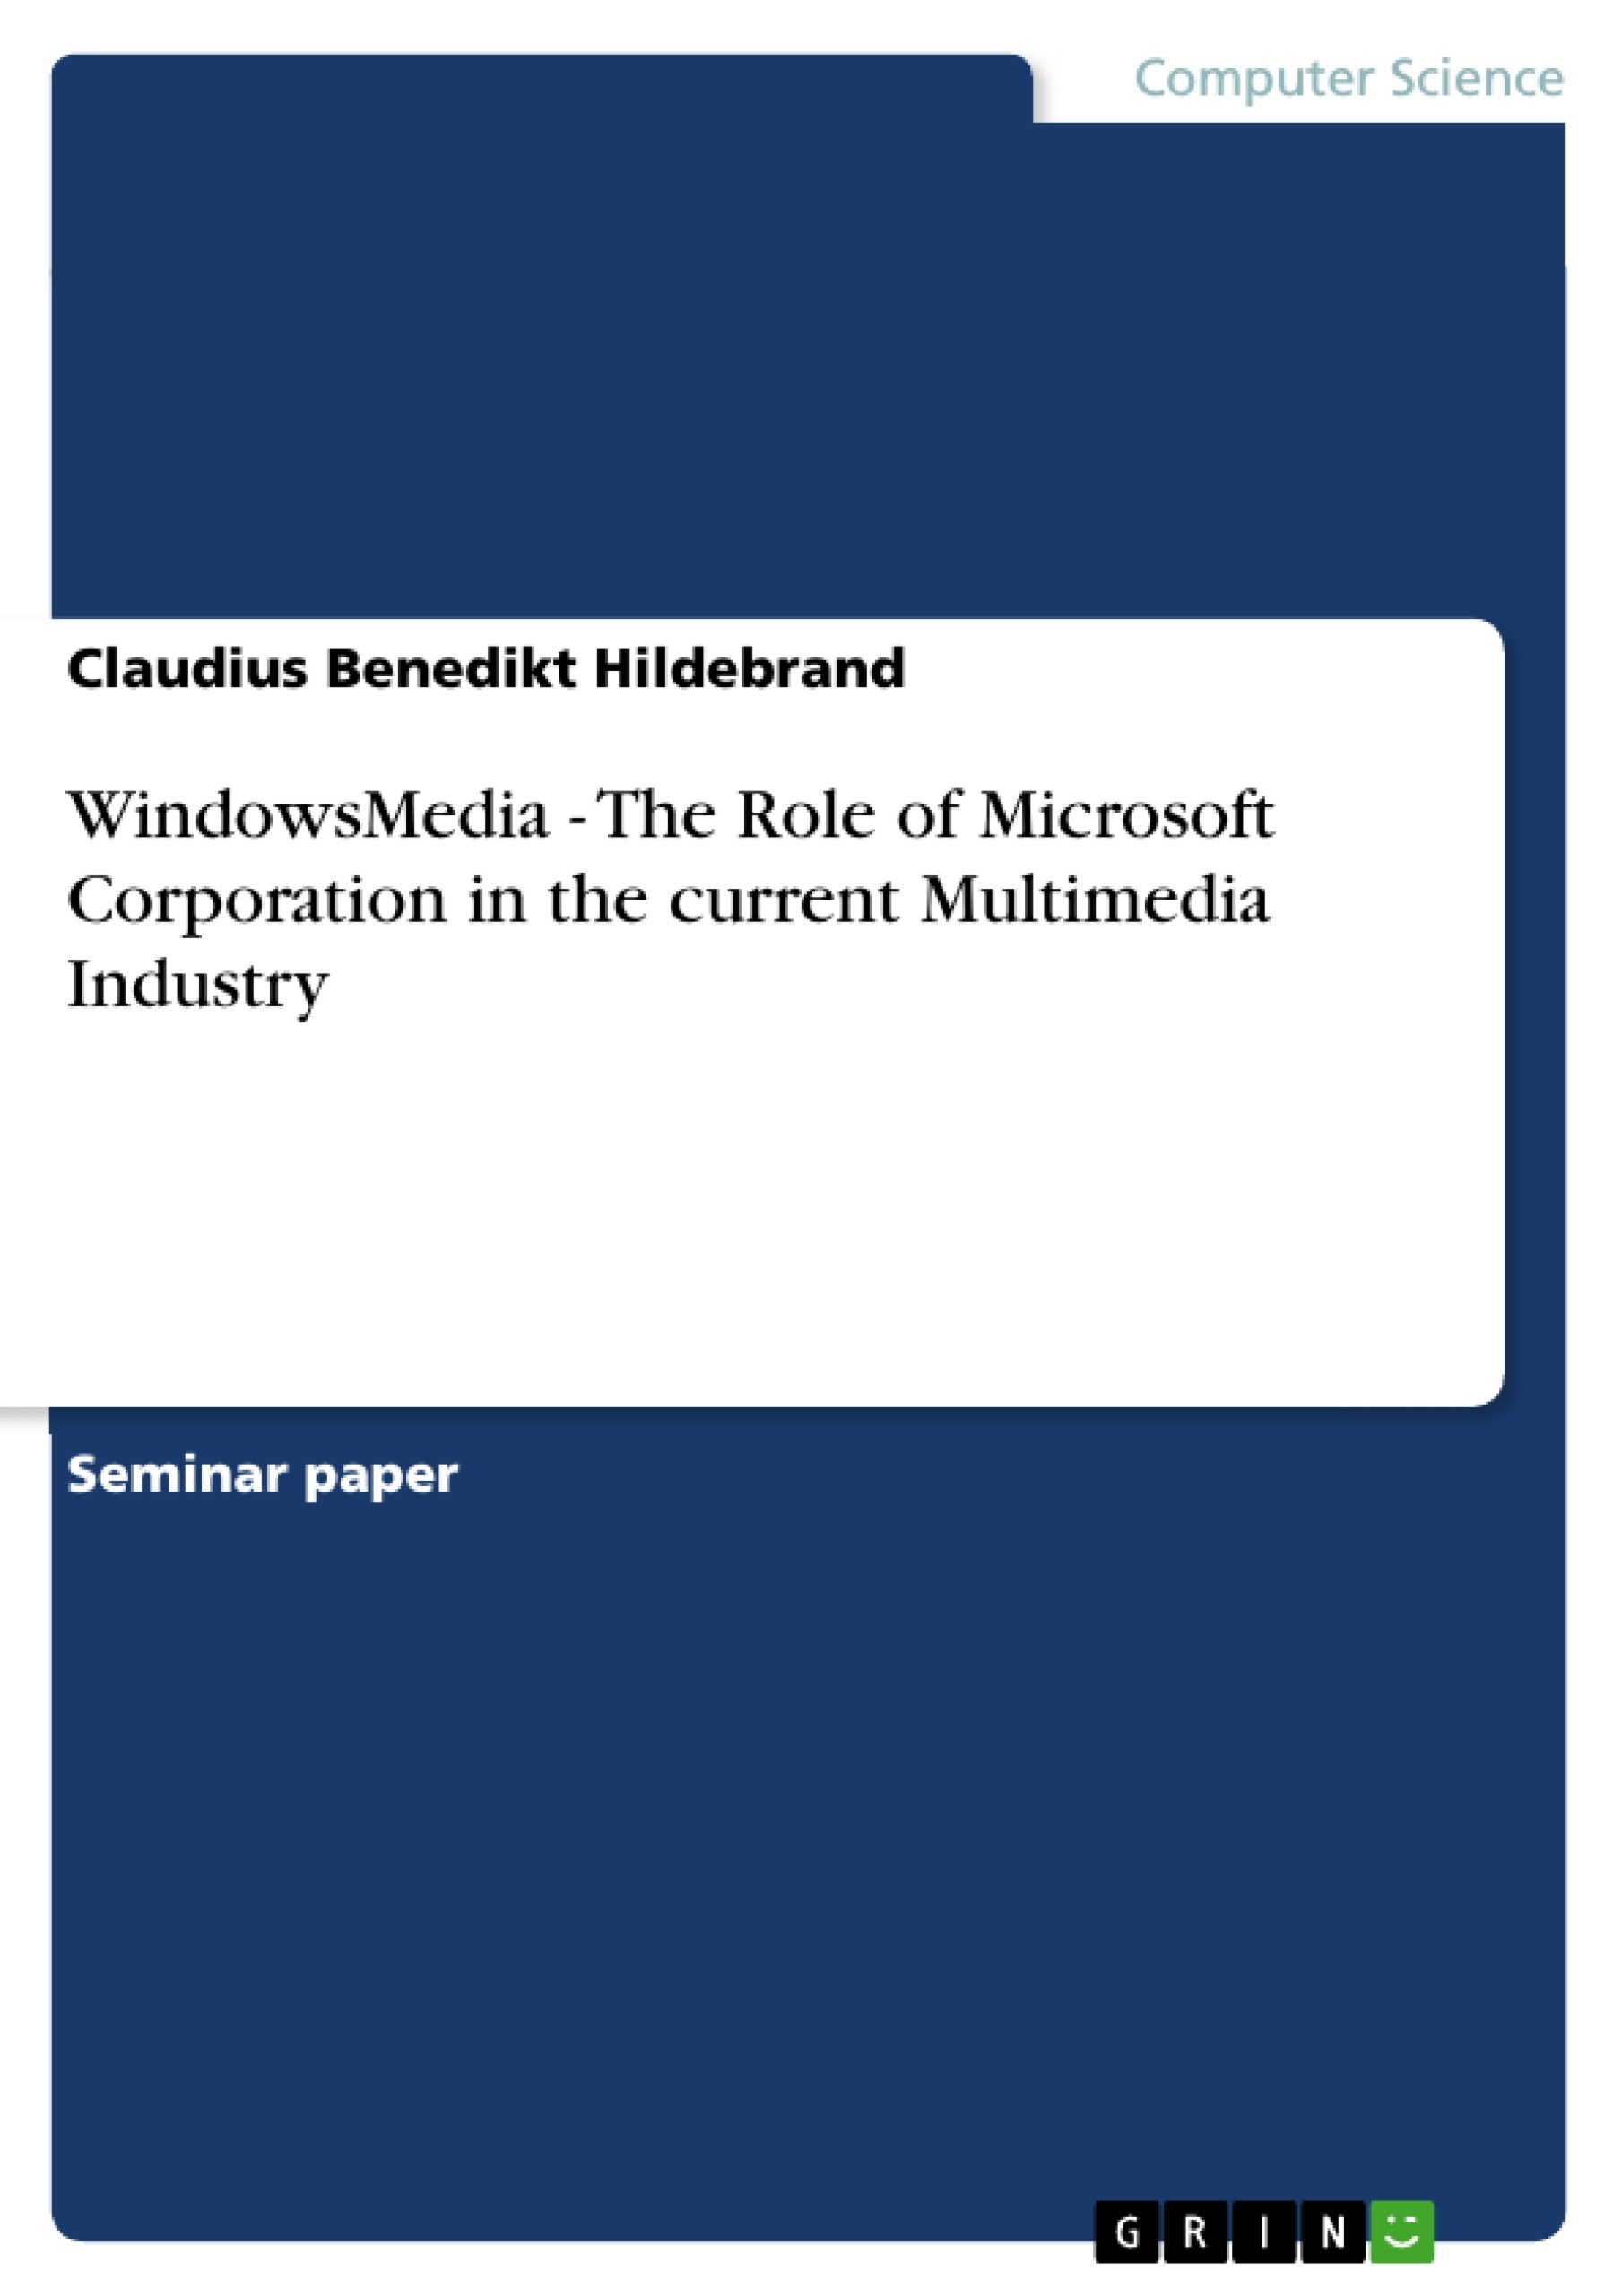 Título: WindowsMedia - The Role of Microsoft Corporation in the current Multimedia Industry